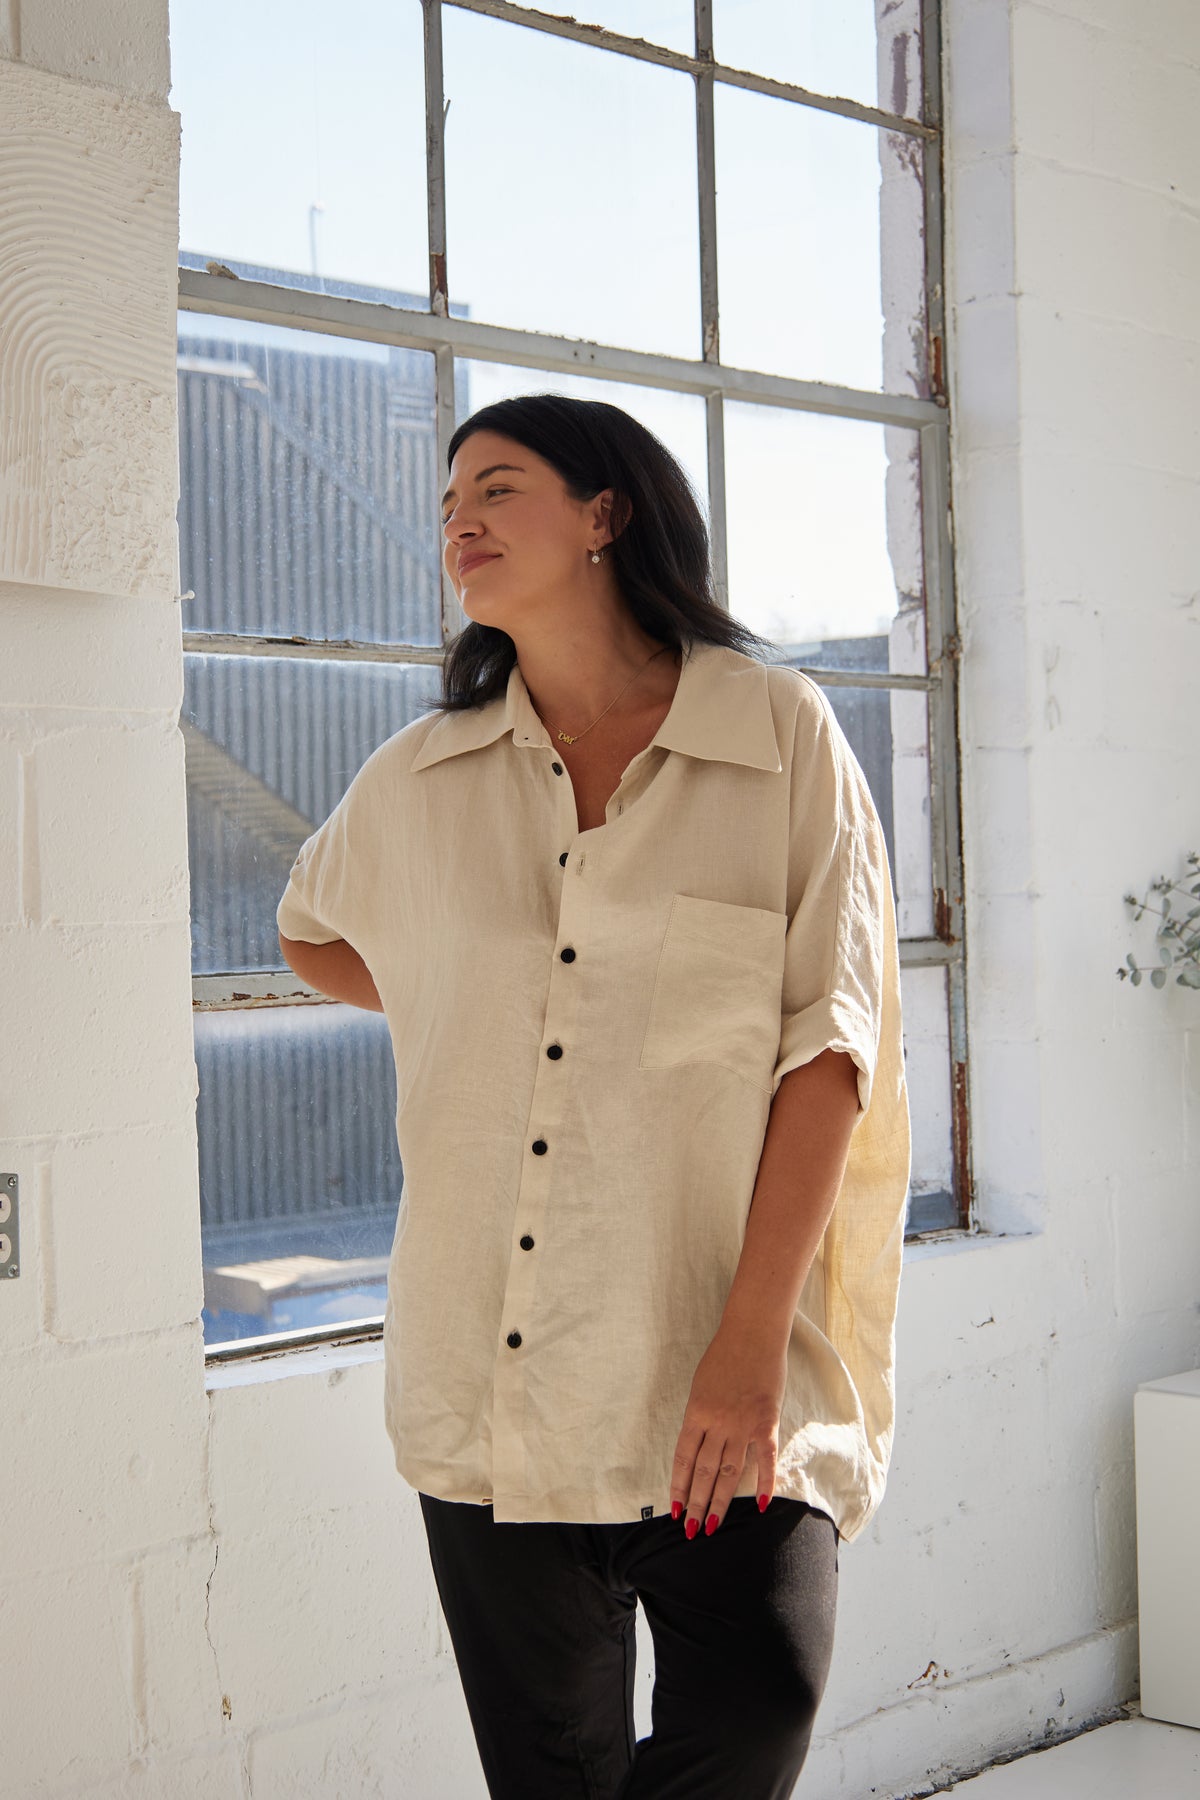 The Shore Top - Linen by Cassandra Elizabeth is an ethically made, minimalist wardrobe essential, and is the epitome of quiet luxury.